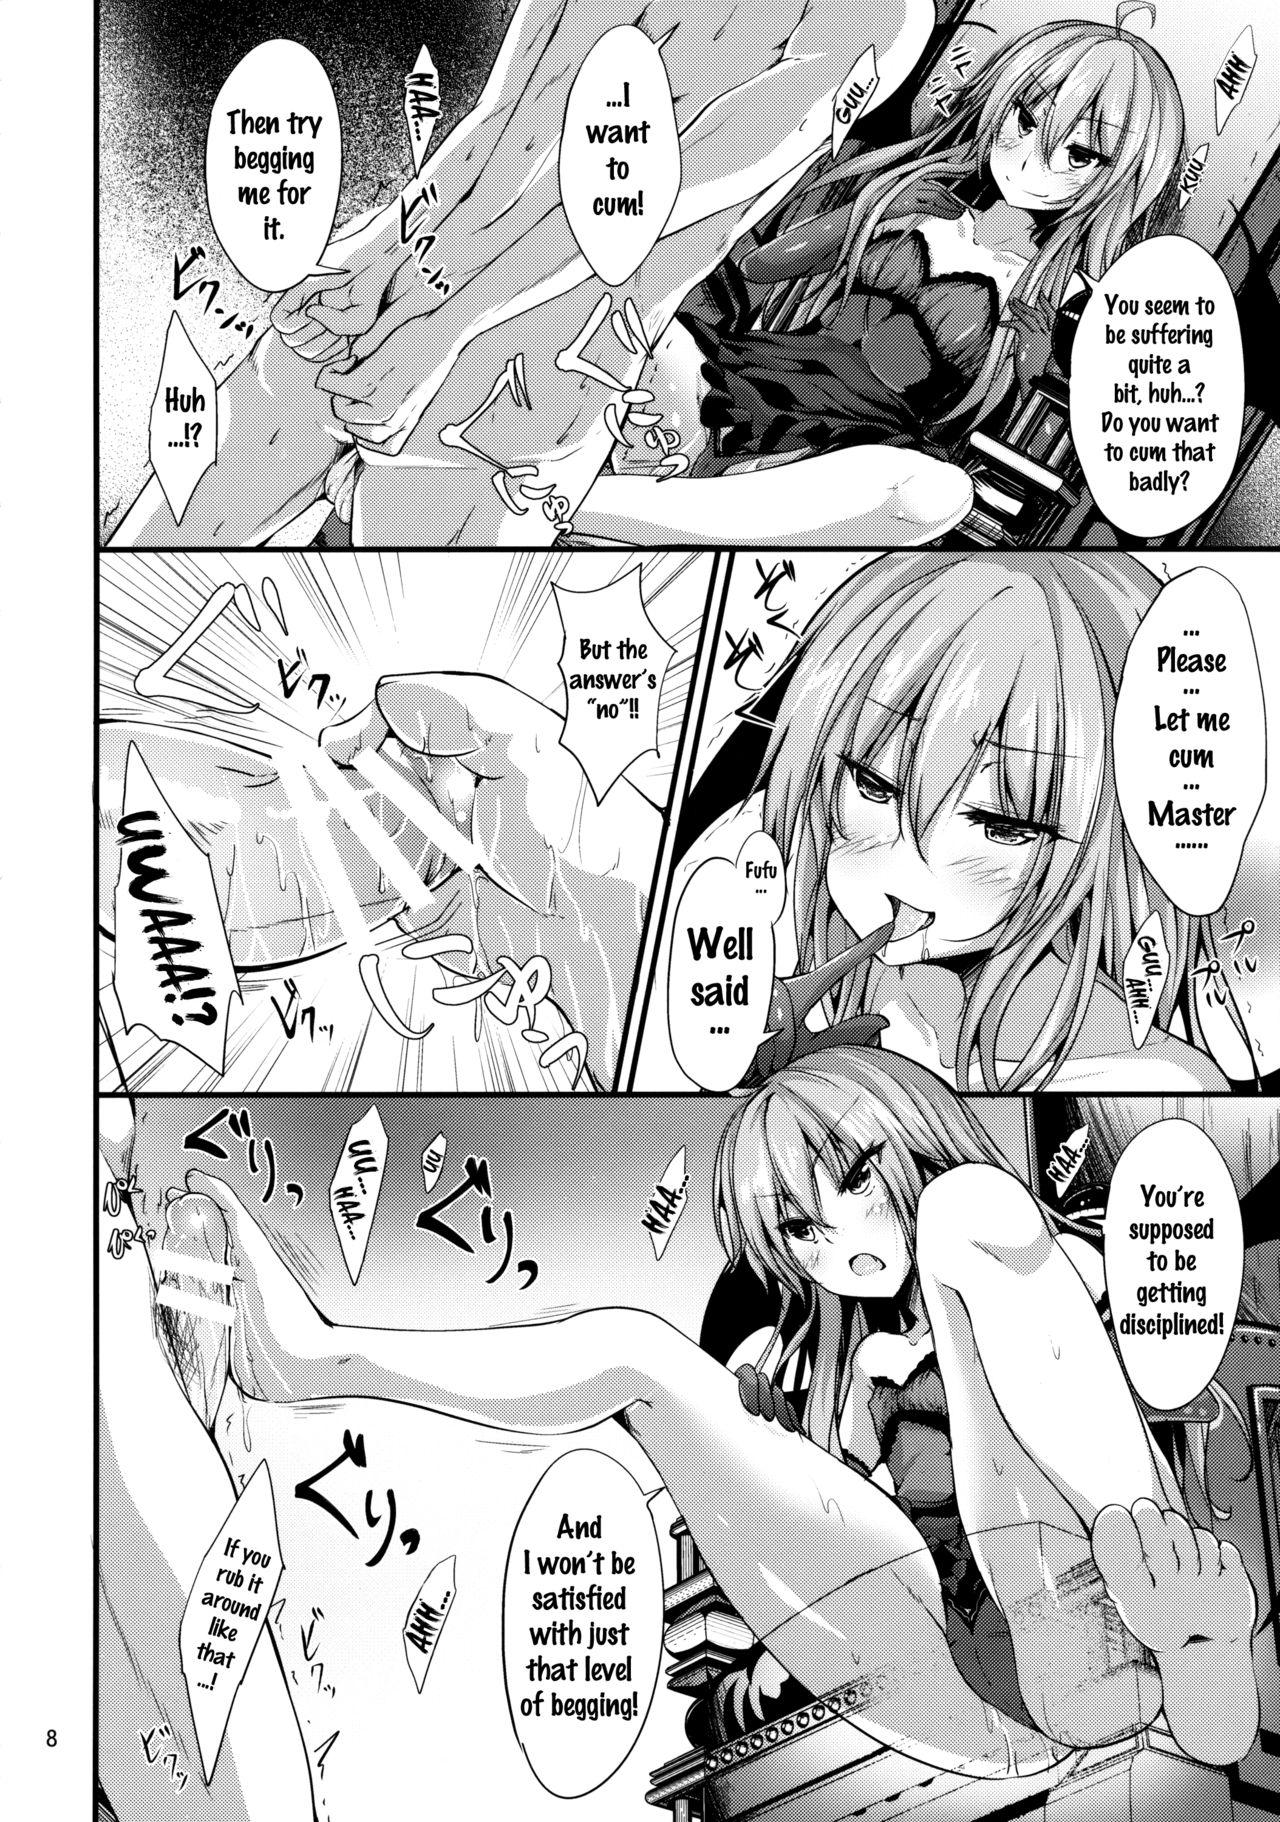 Worship Remi no Motto Otona ni Narumon! | Remi's Becoming More of An Adult! - Touhou project Brother - Page 7